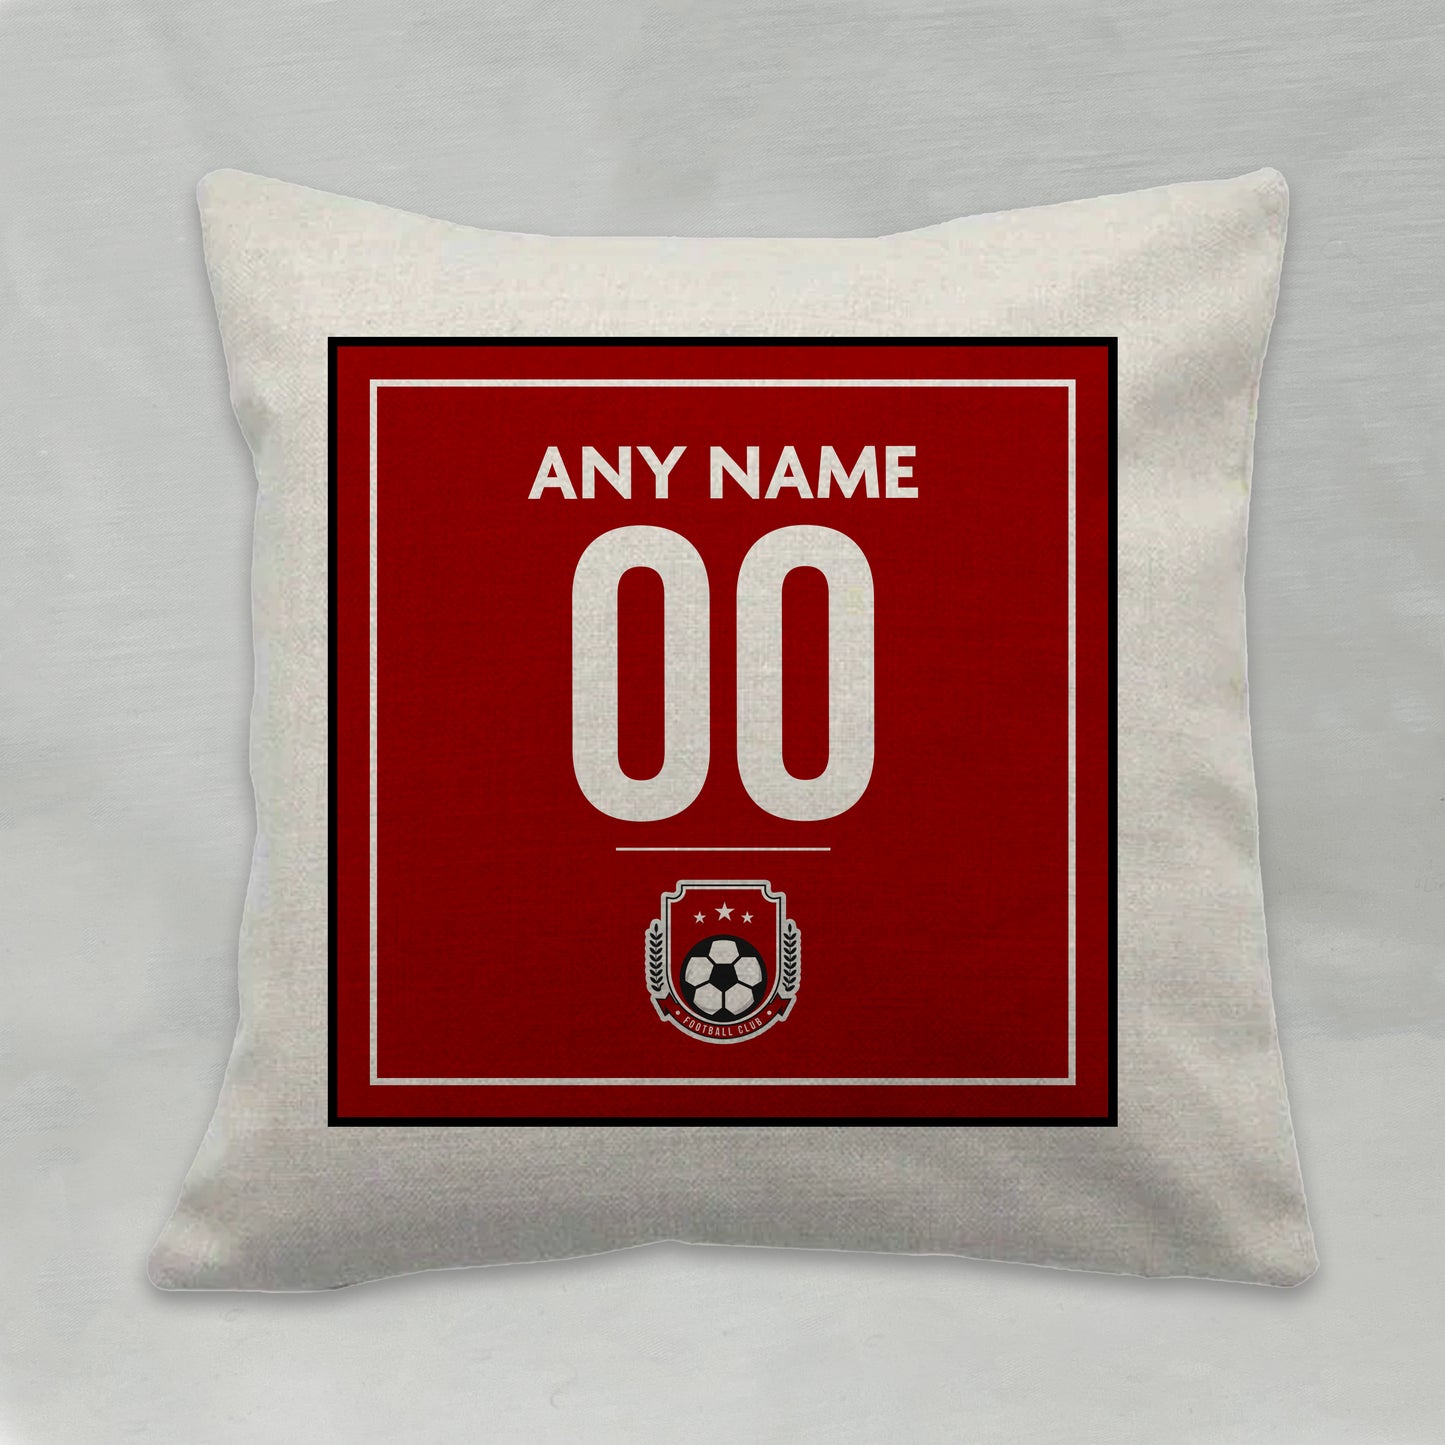 Name and Number Cushion